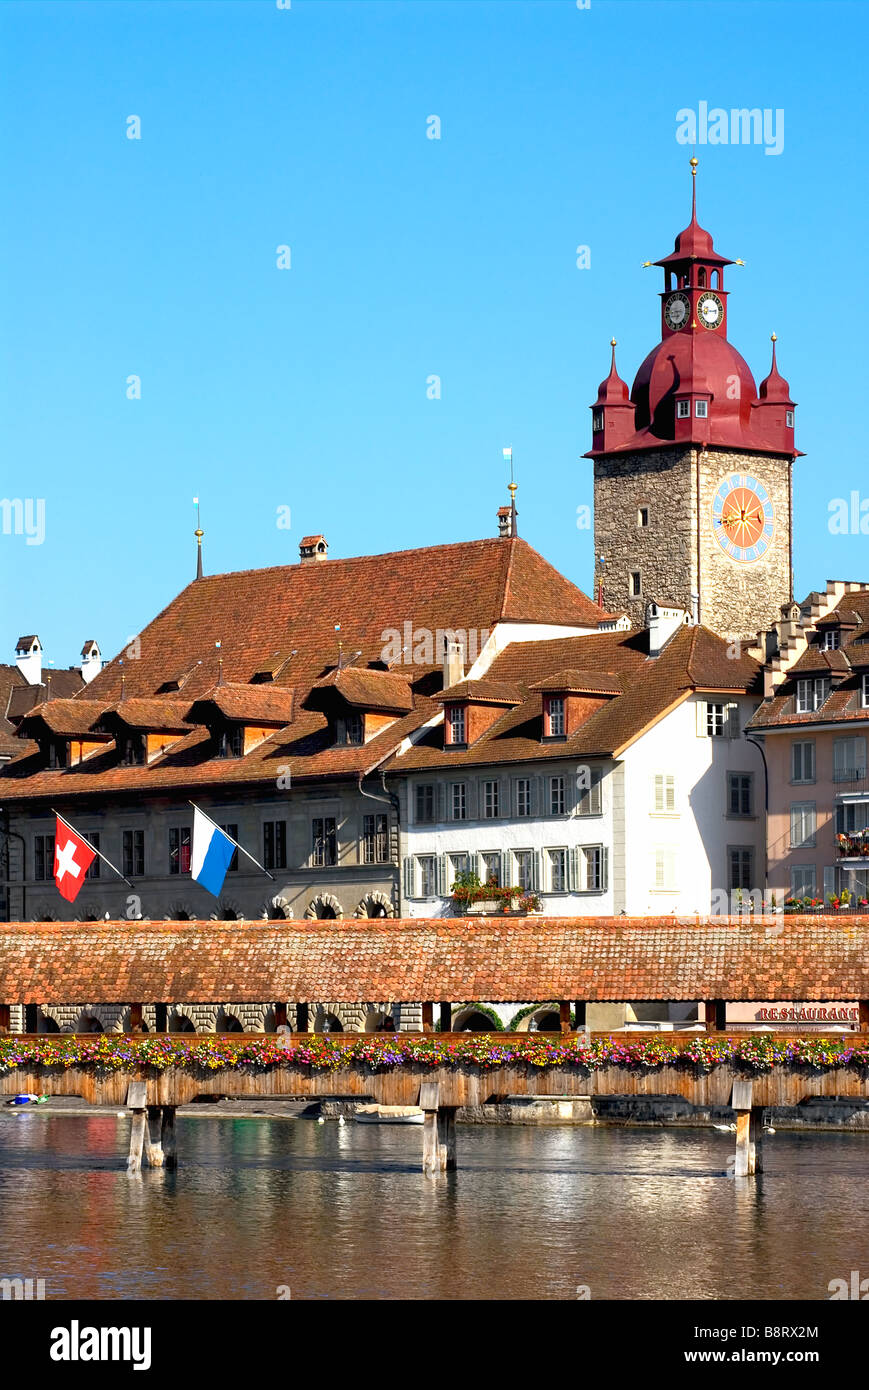 Historical old town and the Chapel Bridge (Kapellbruecke) in front of the clock tower of the Lucerne town hall Stock Photo